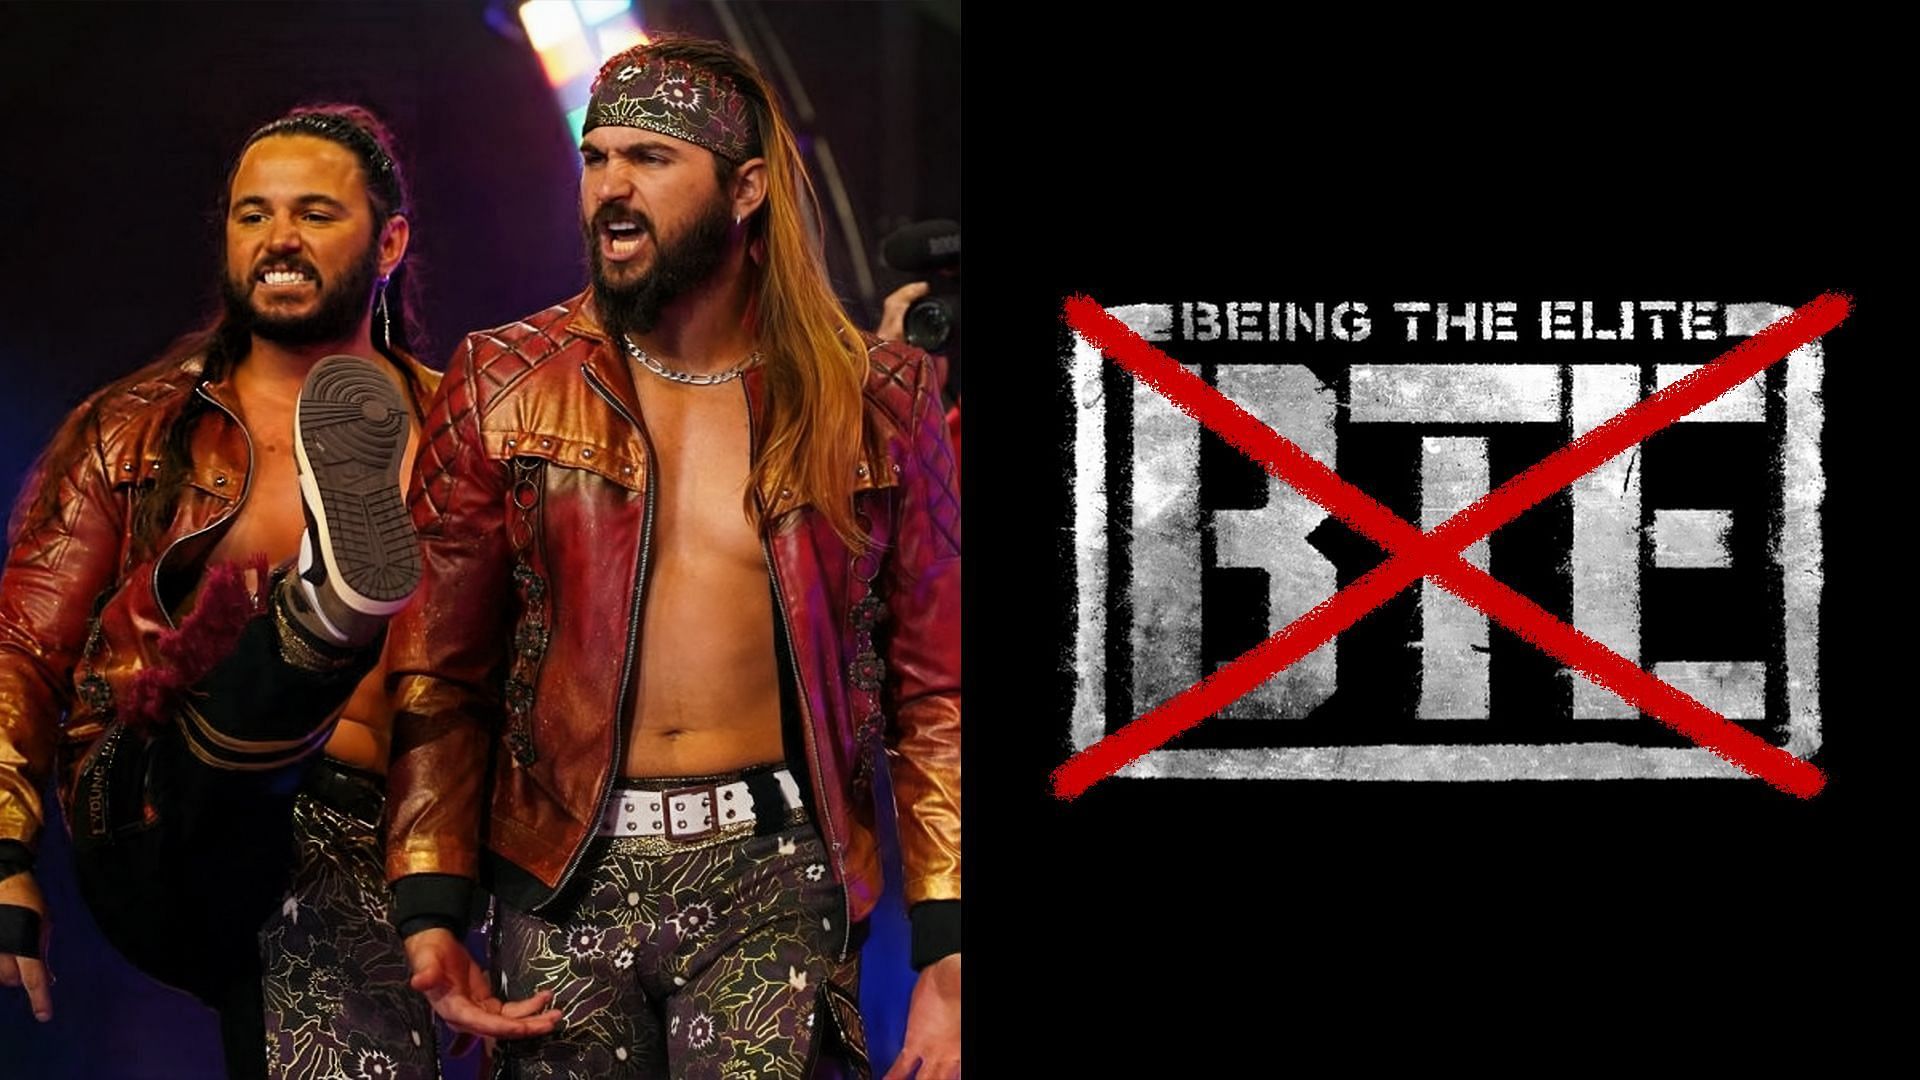 The Young Bucks have allegedly put an end to Being The Elite